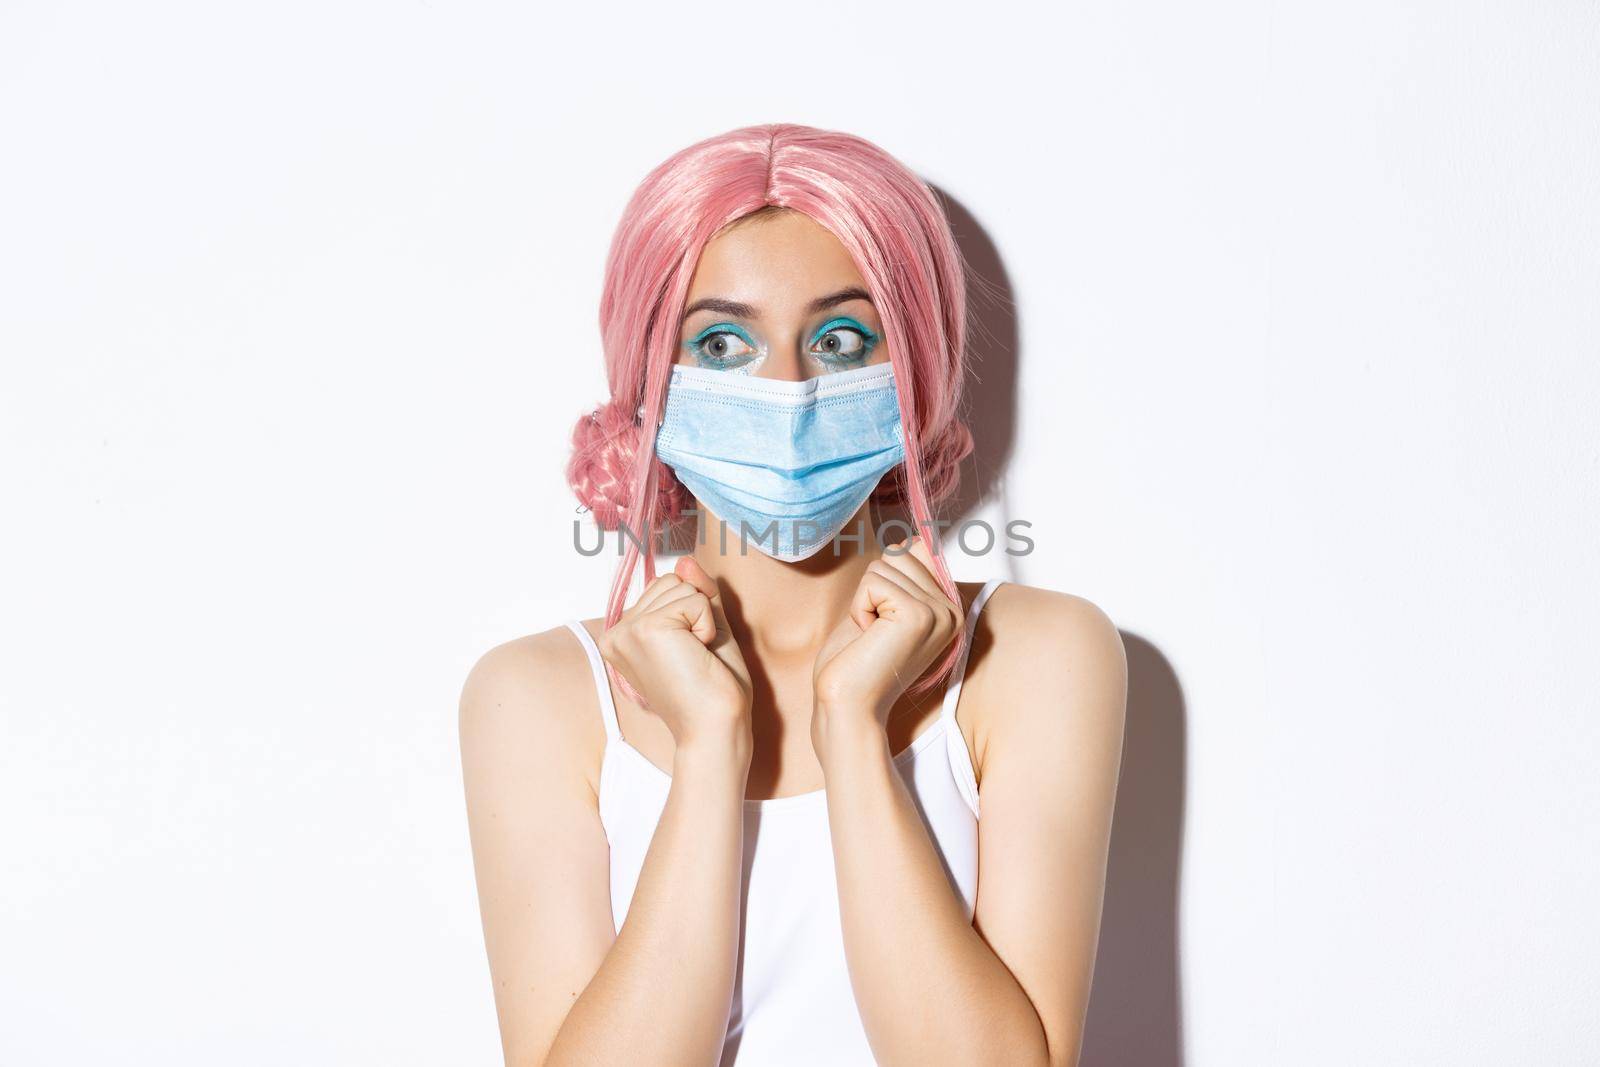 Coronavirus, social distancing and lifestyle concept. Close-up of beautiful excited girl looking left and jumping from temptation, wearing pink party wig and medical mask.